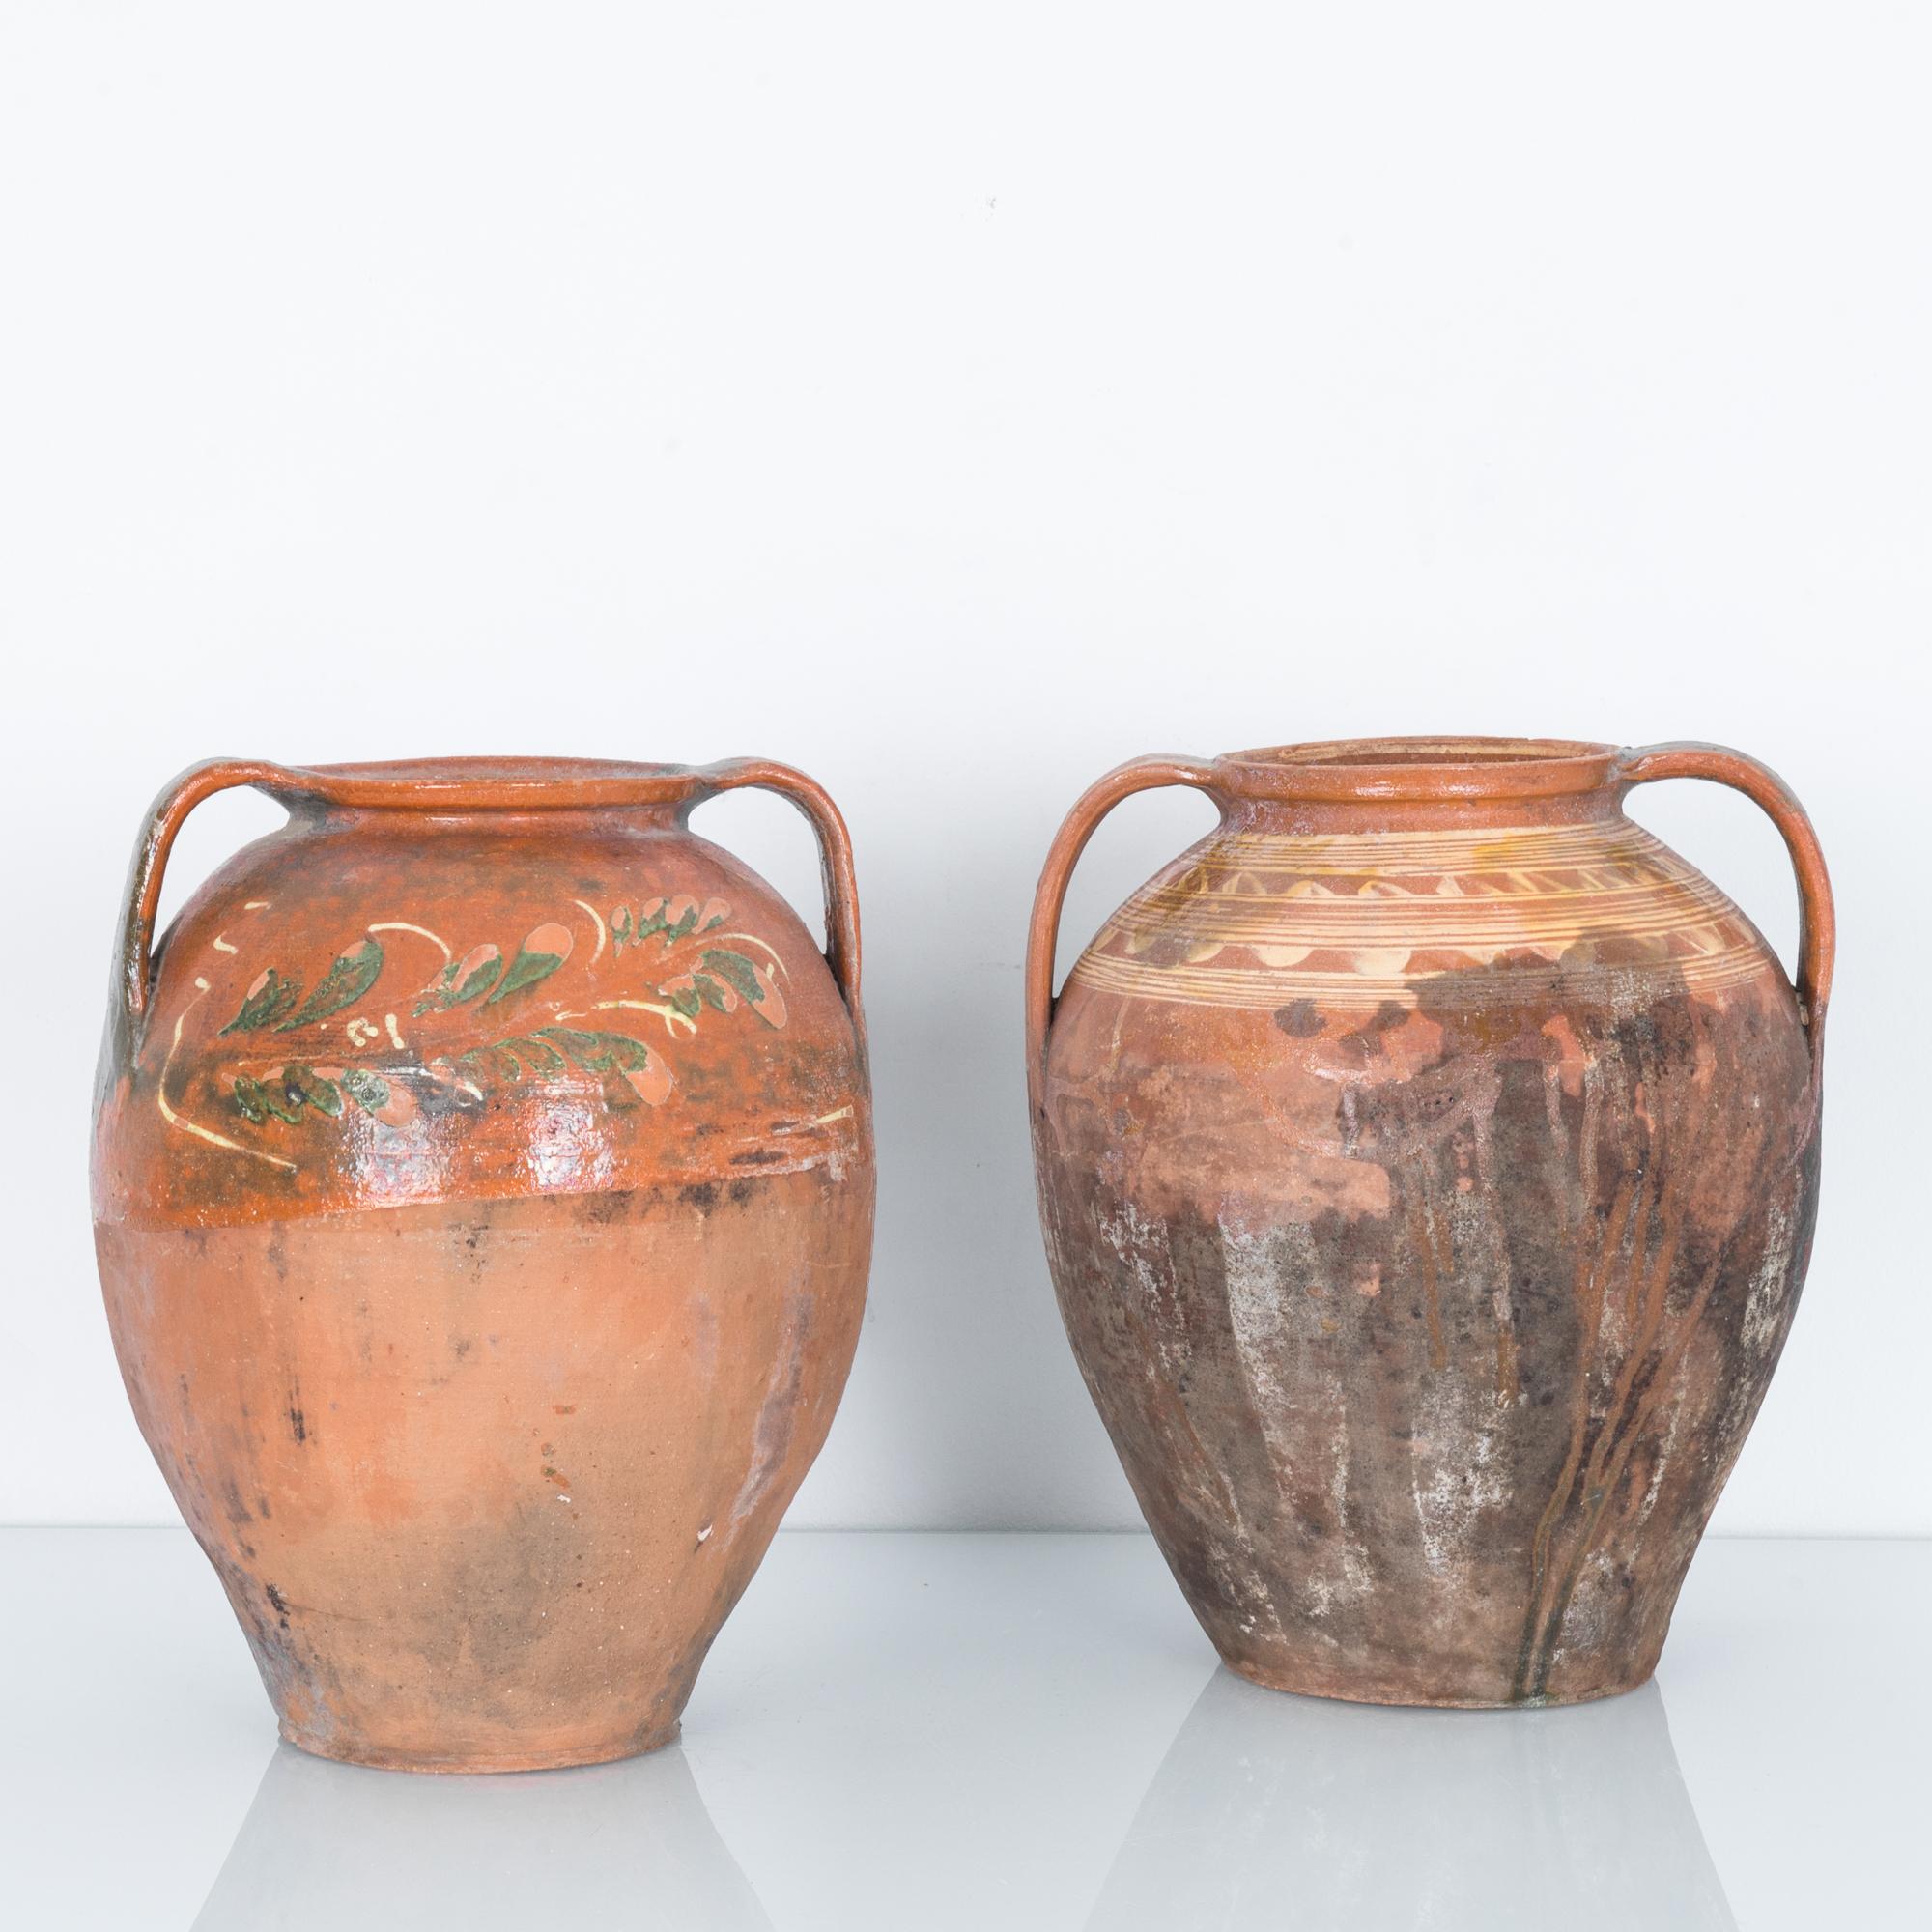 The dominant form of storage for food or agricultural purposes for thousands of years. These workhorse vessels remind us of the humble origins of the country pot. The subtle beauty found in everyday practicality. These stoneware vessels come from